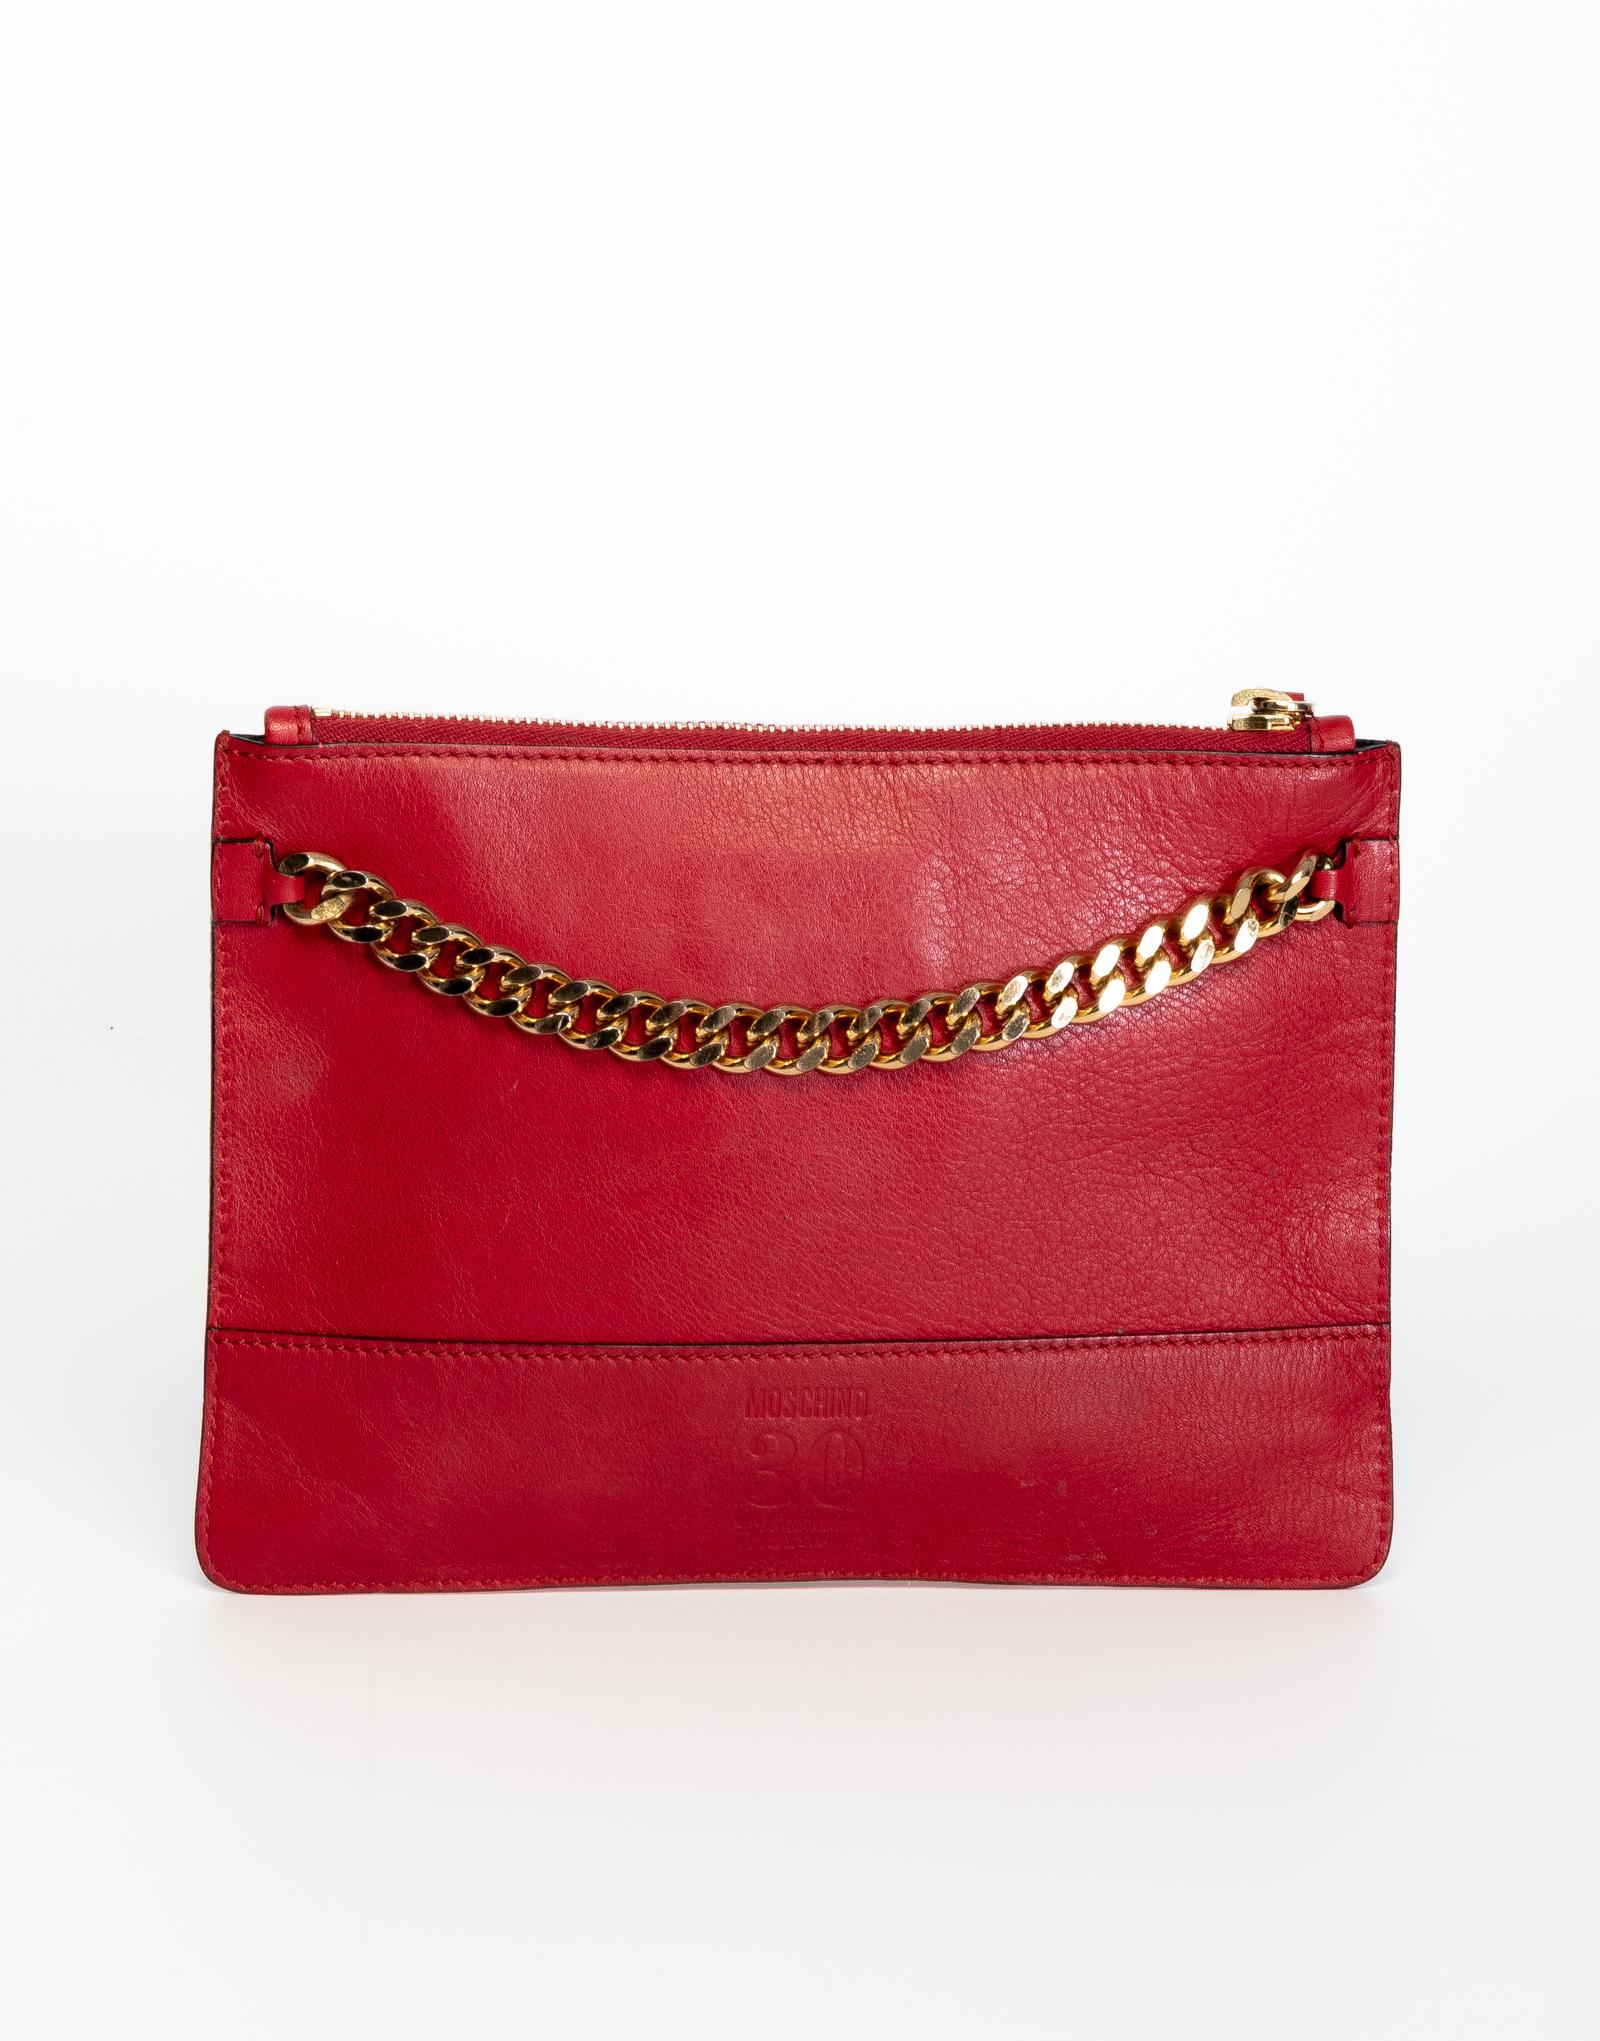 Moschino clutch made out of red leather featuring  gold tone hardware, moveable 